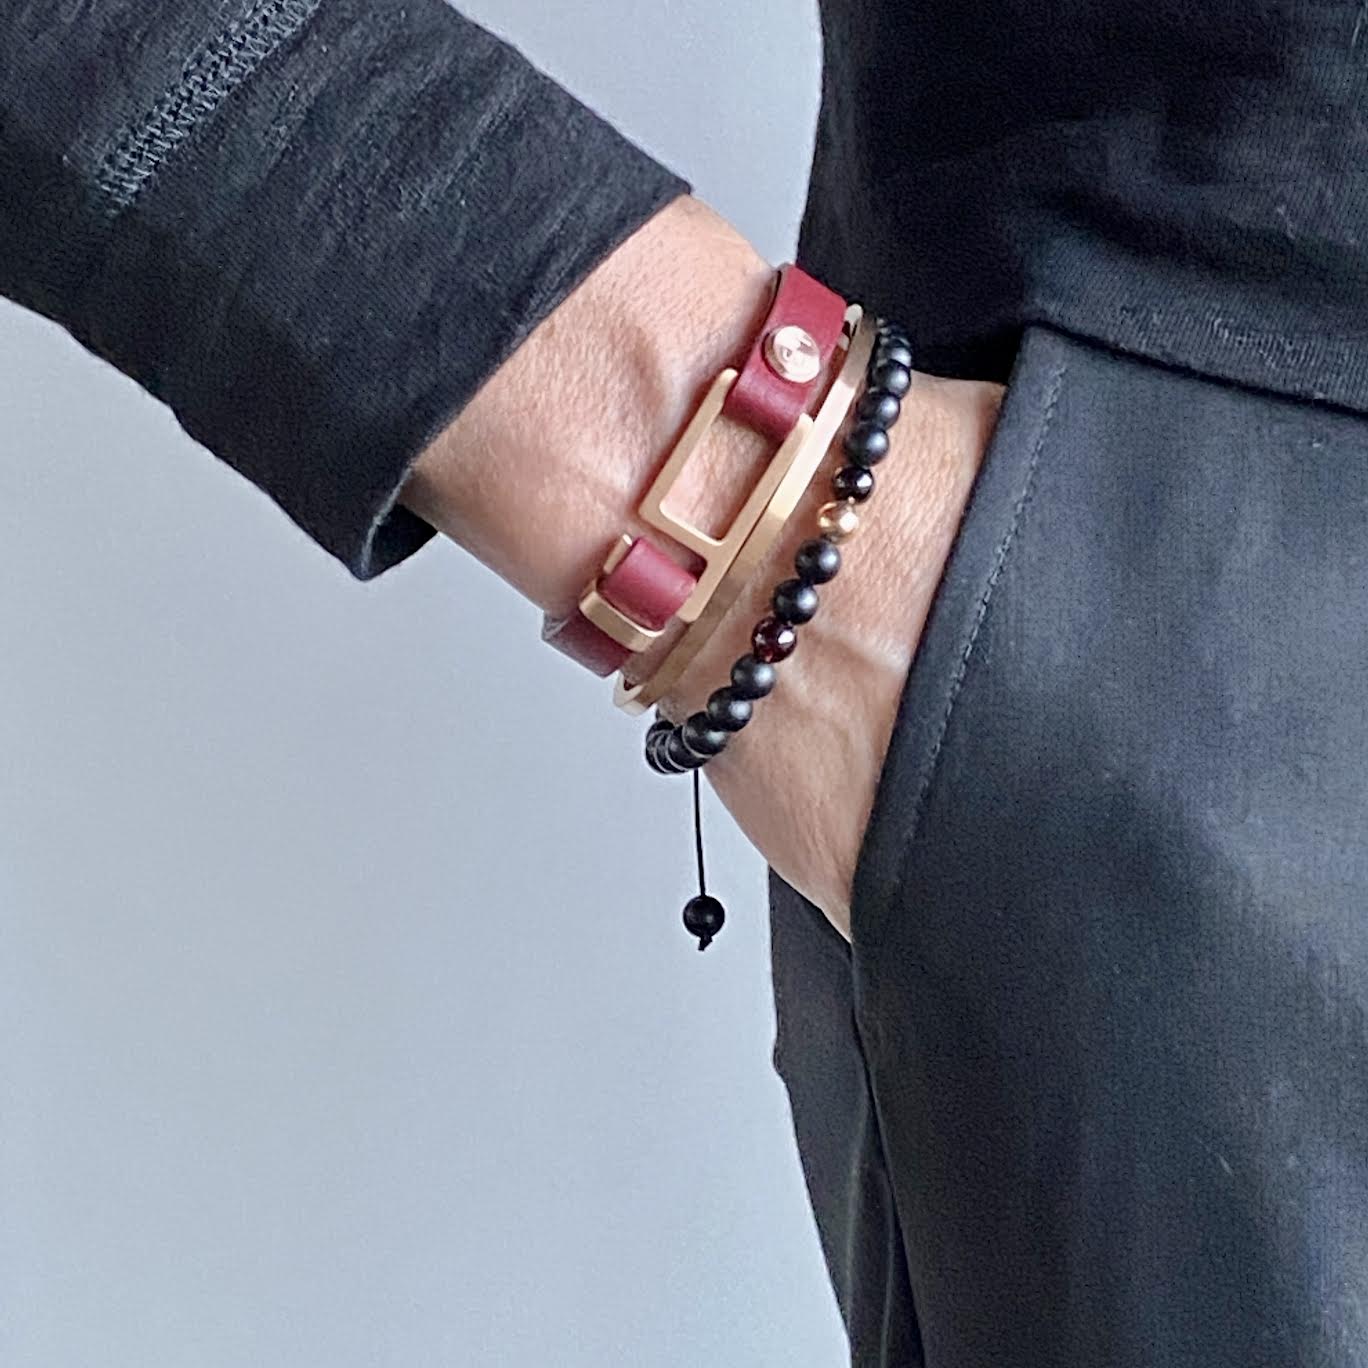 Our striking burgundy/black Italian leather bracelet is paired perfectly with our artisan designed, lightly brushed hardware. Your hardware choices include Rose Gold, Yellow Gold, Stainless Steel or Black Ceramic. This adjustable size bracelet is a distinctive piece worn alone or with a WristBend stacking bracelet. Made by WristBend